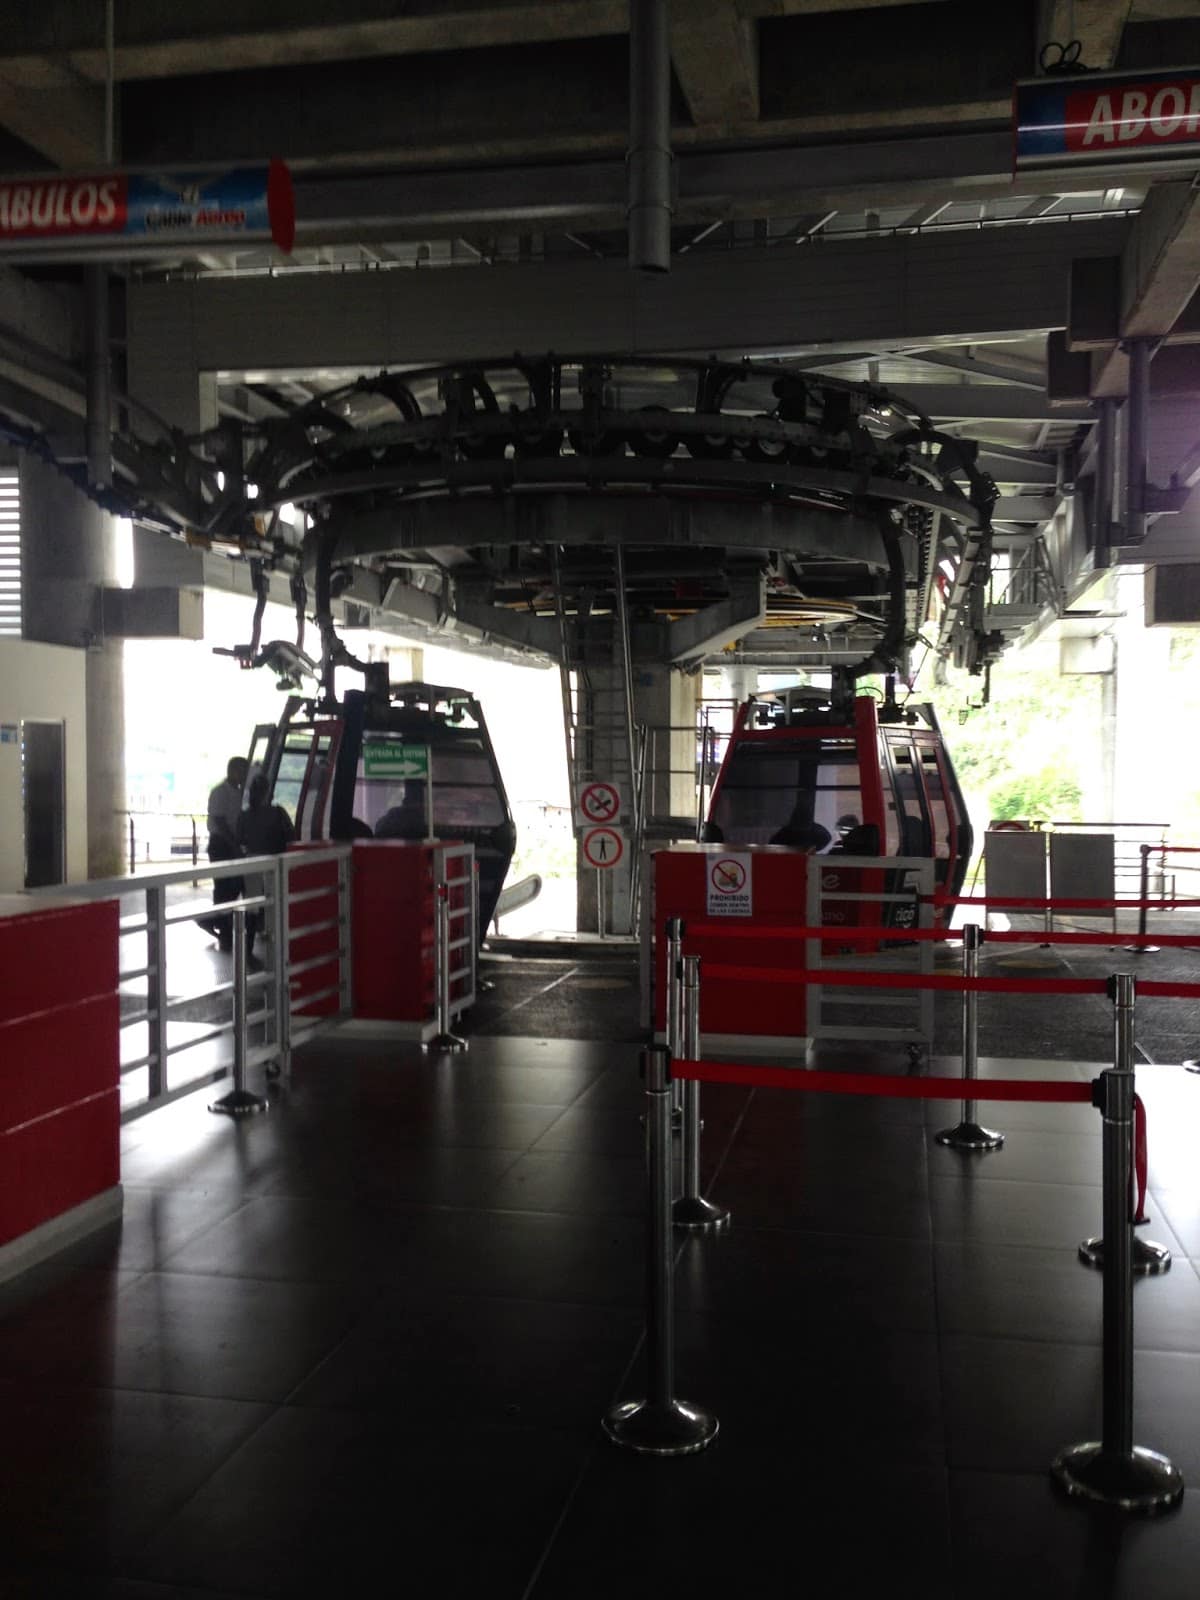 Cable car at the bus terminal in Manizales, Caldas, Colombia